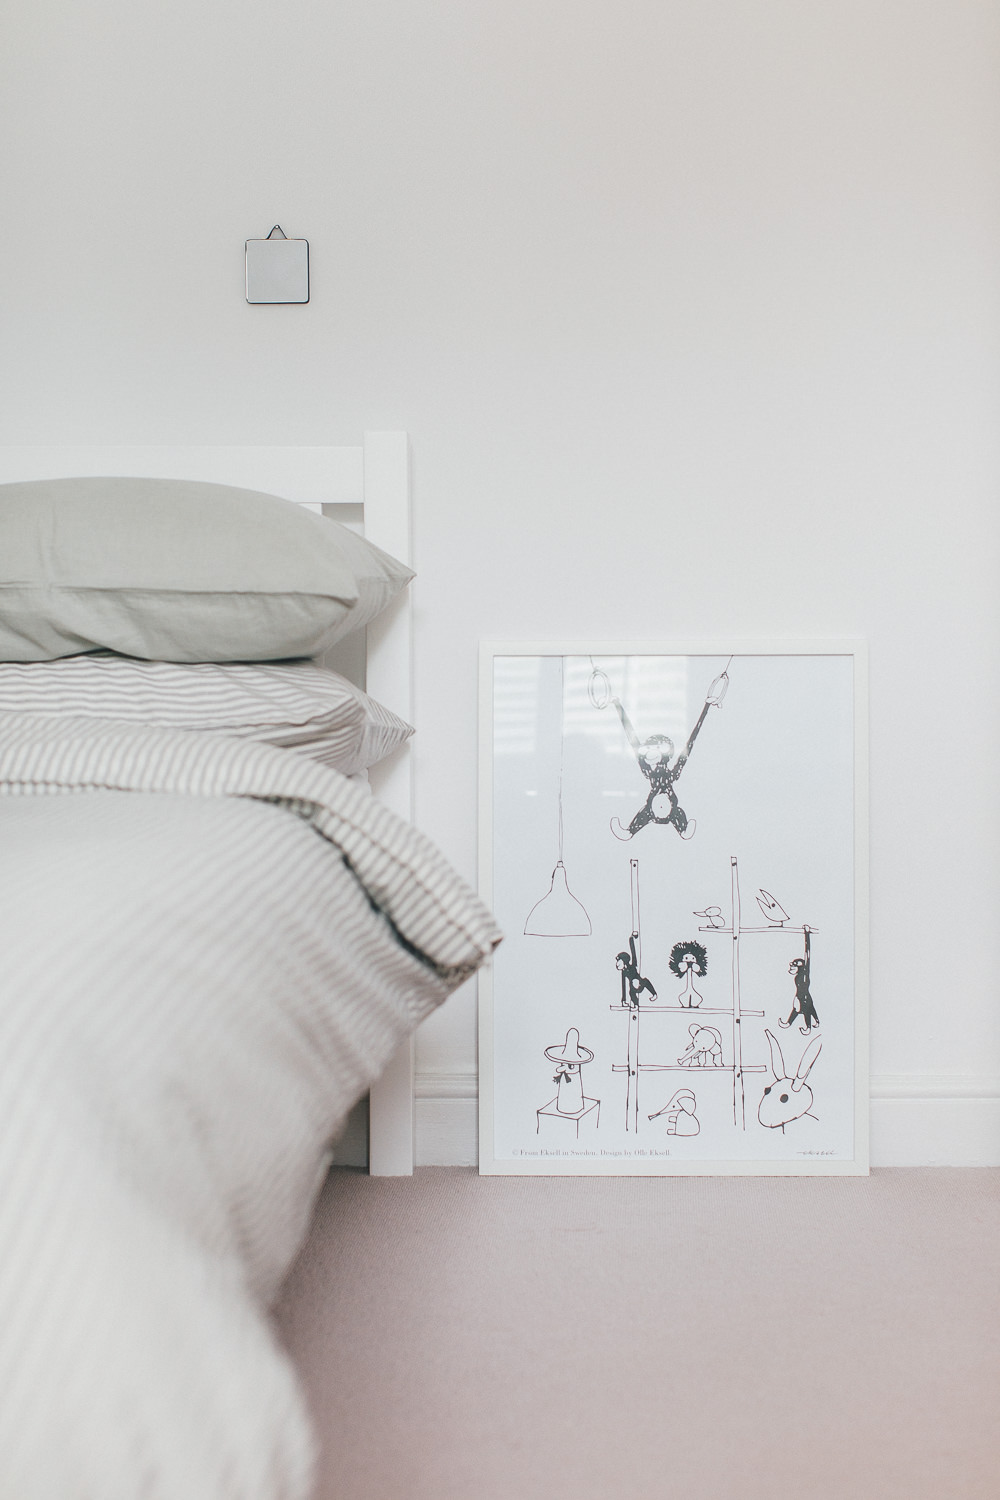 Neutral Bedding | John Lewis Bed | Toast Bedding | Statement wall light | Childrens room | Kids Room | A modern neutral millennial pink bedroom for children with handmade furniture, personalised artwork and statement lighting